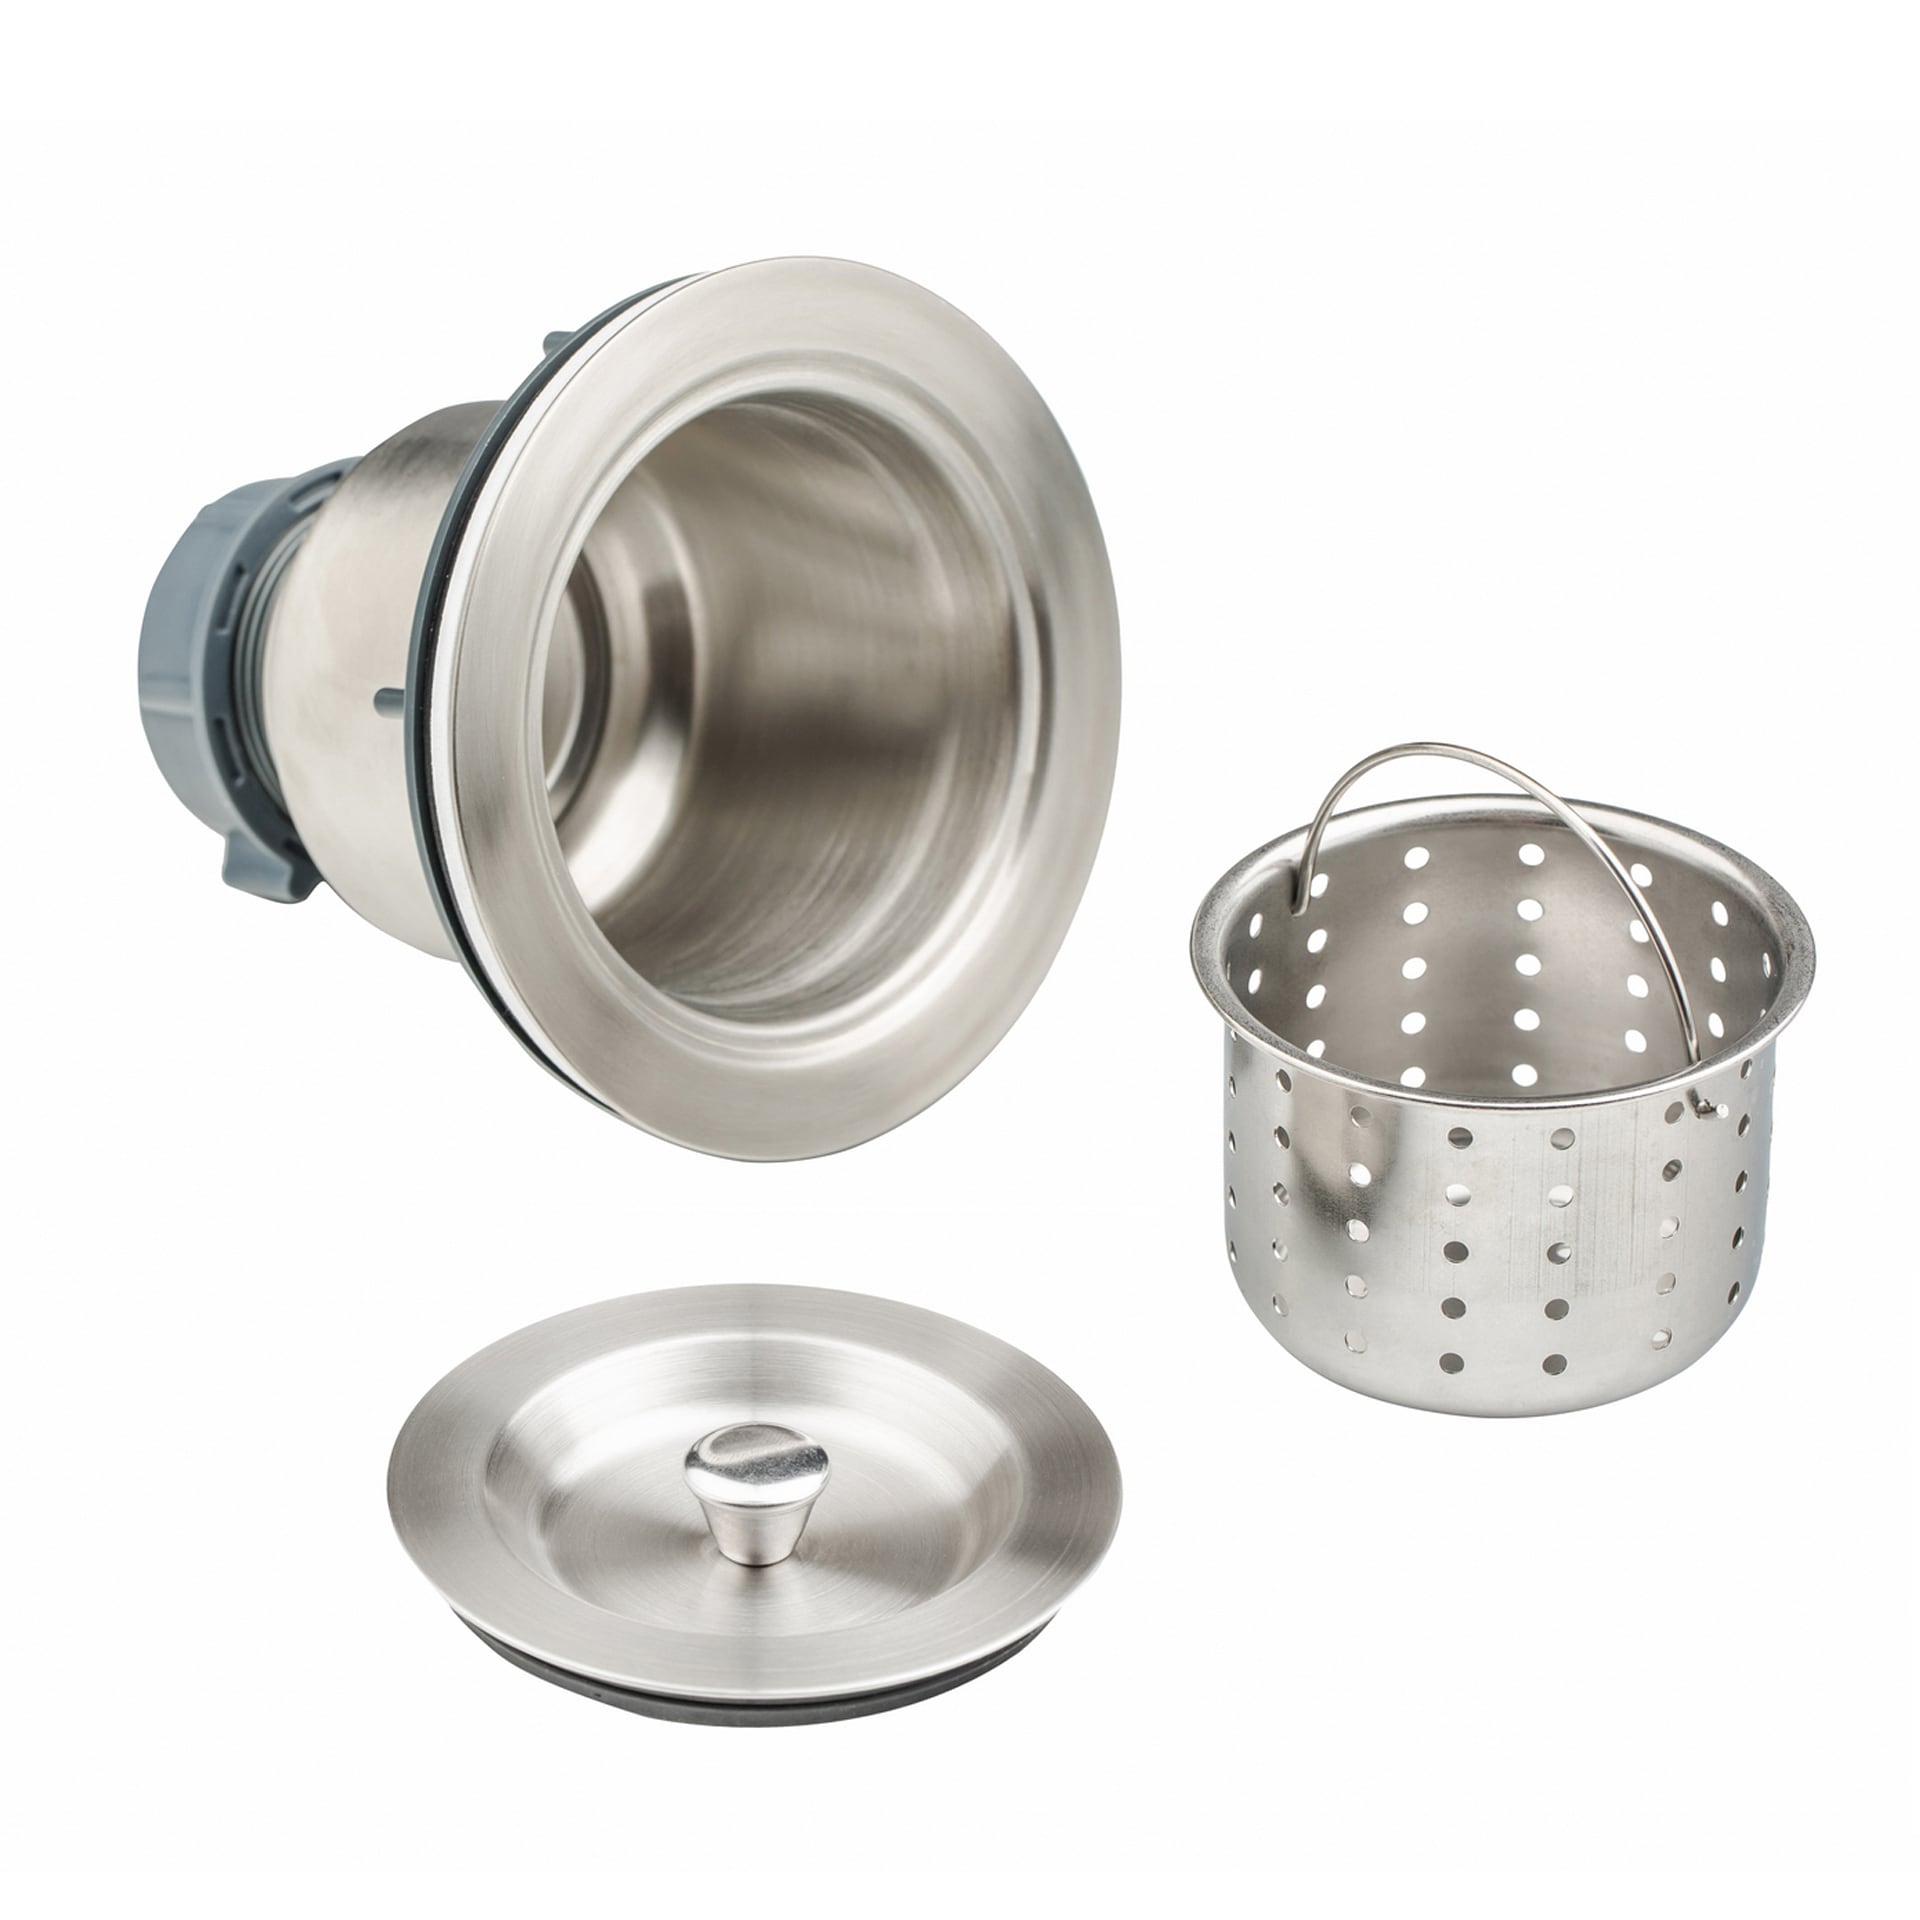 Empava 20.20 in Stainless Steel Stainless Steel Rust Resistant Strainer with  Basket Included